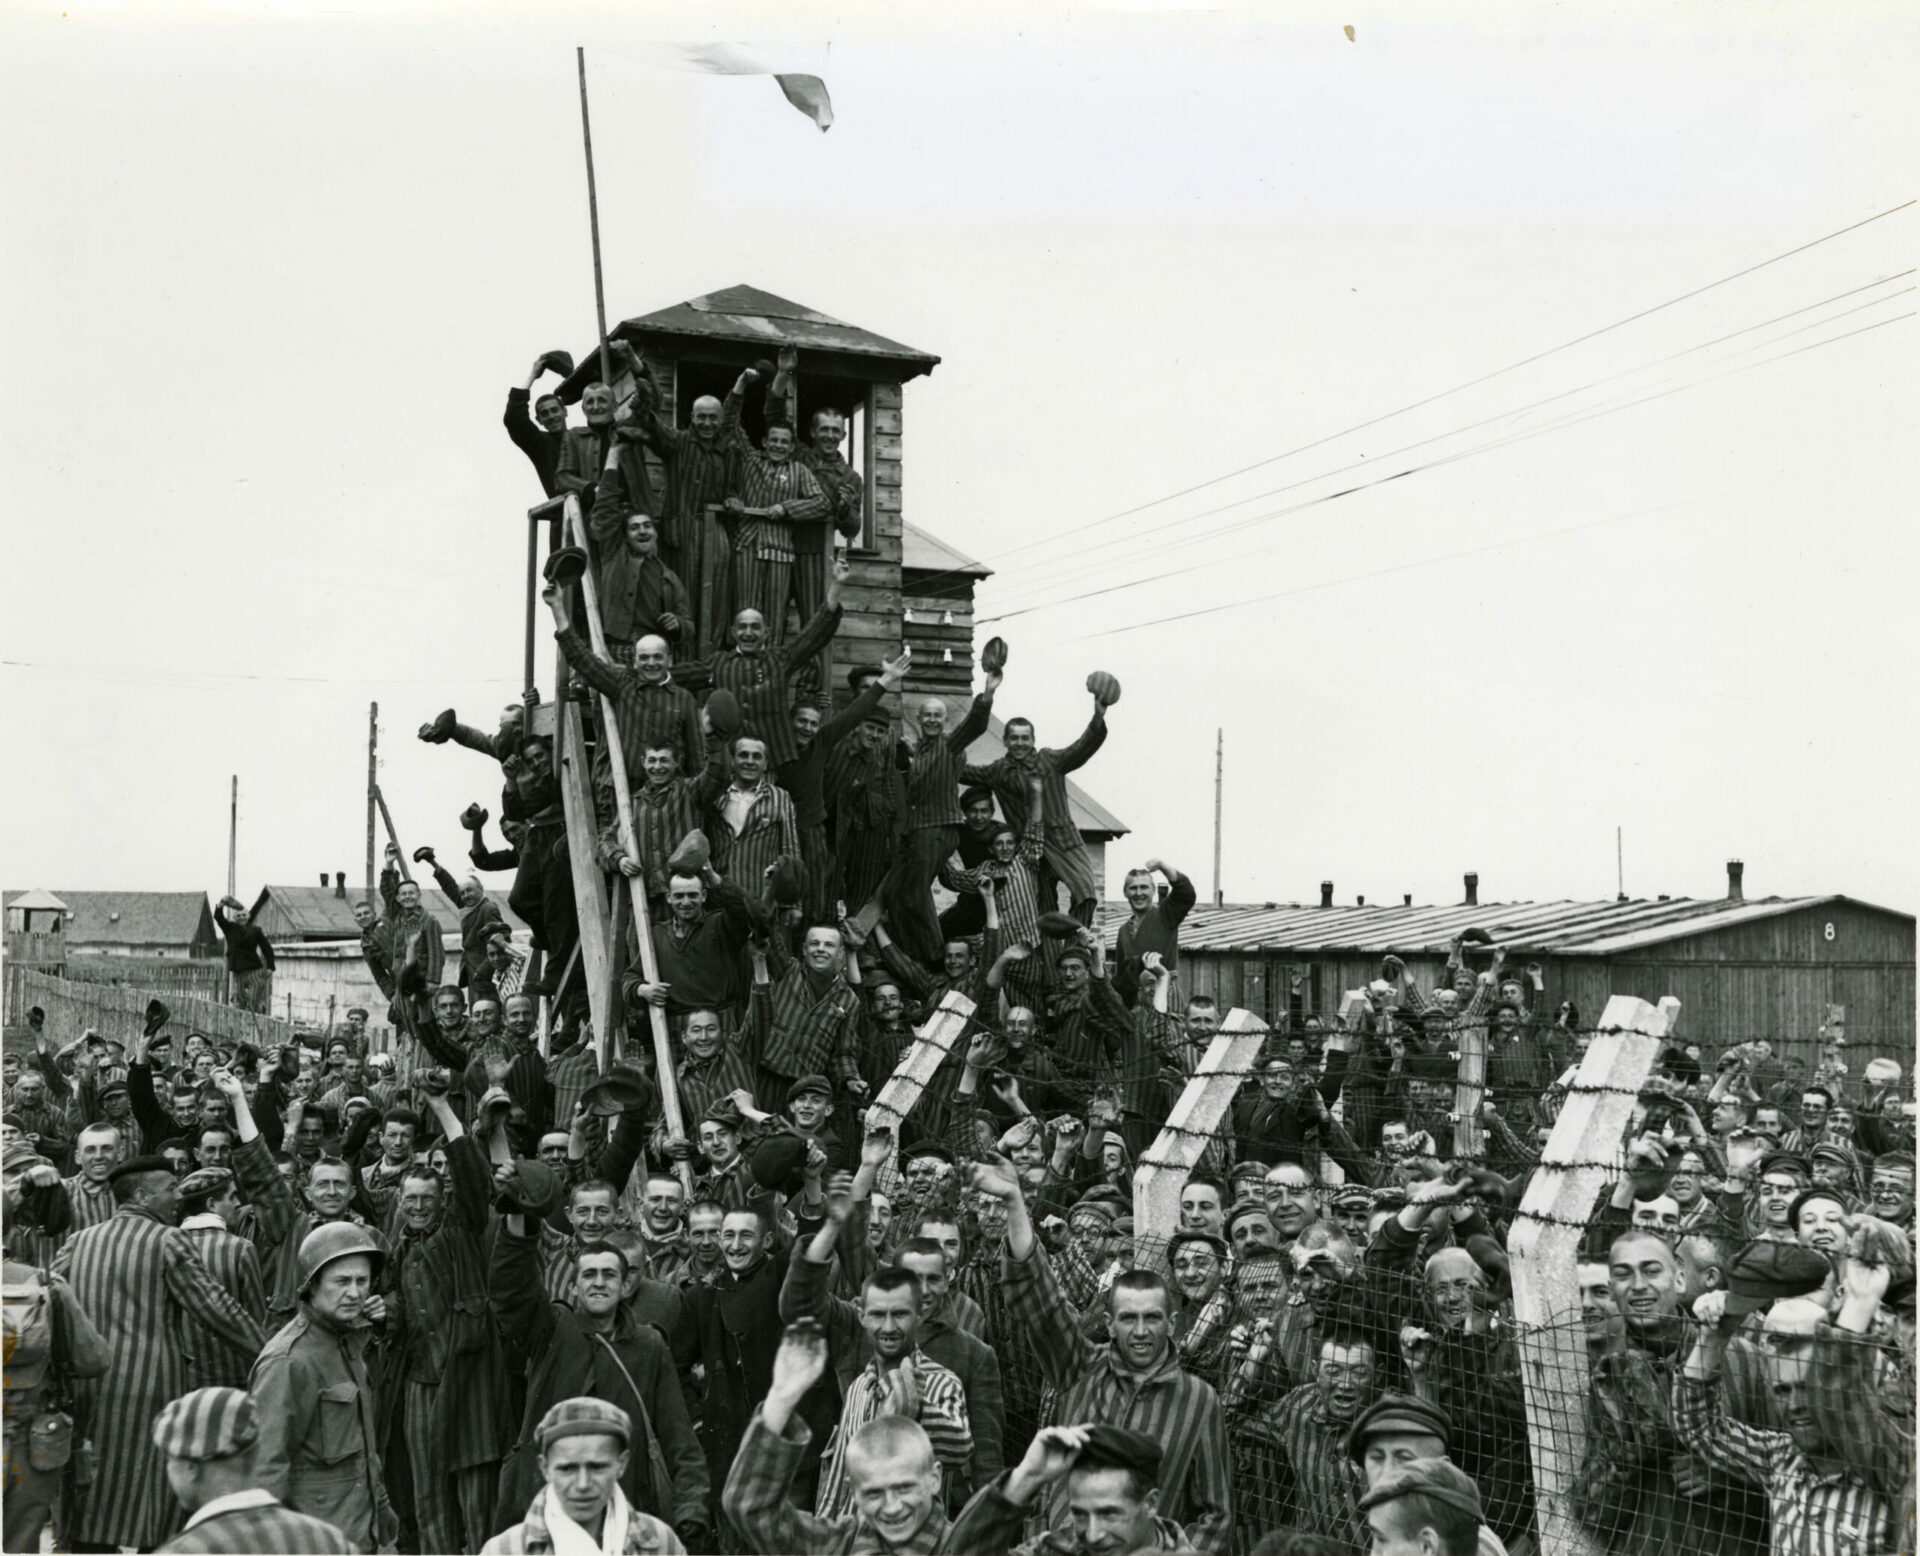 Pics US troops liberated Dachau concentration camp 76 years ago